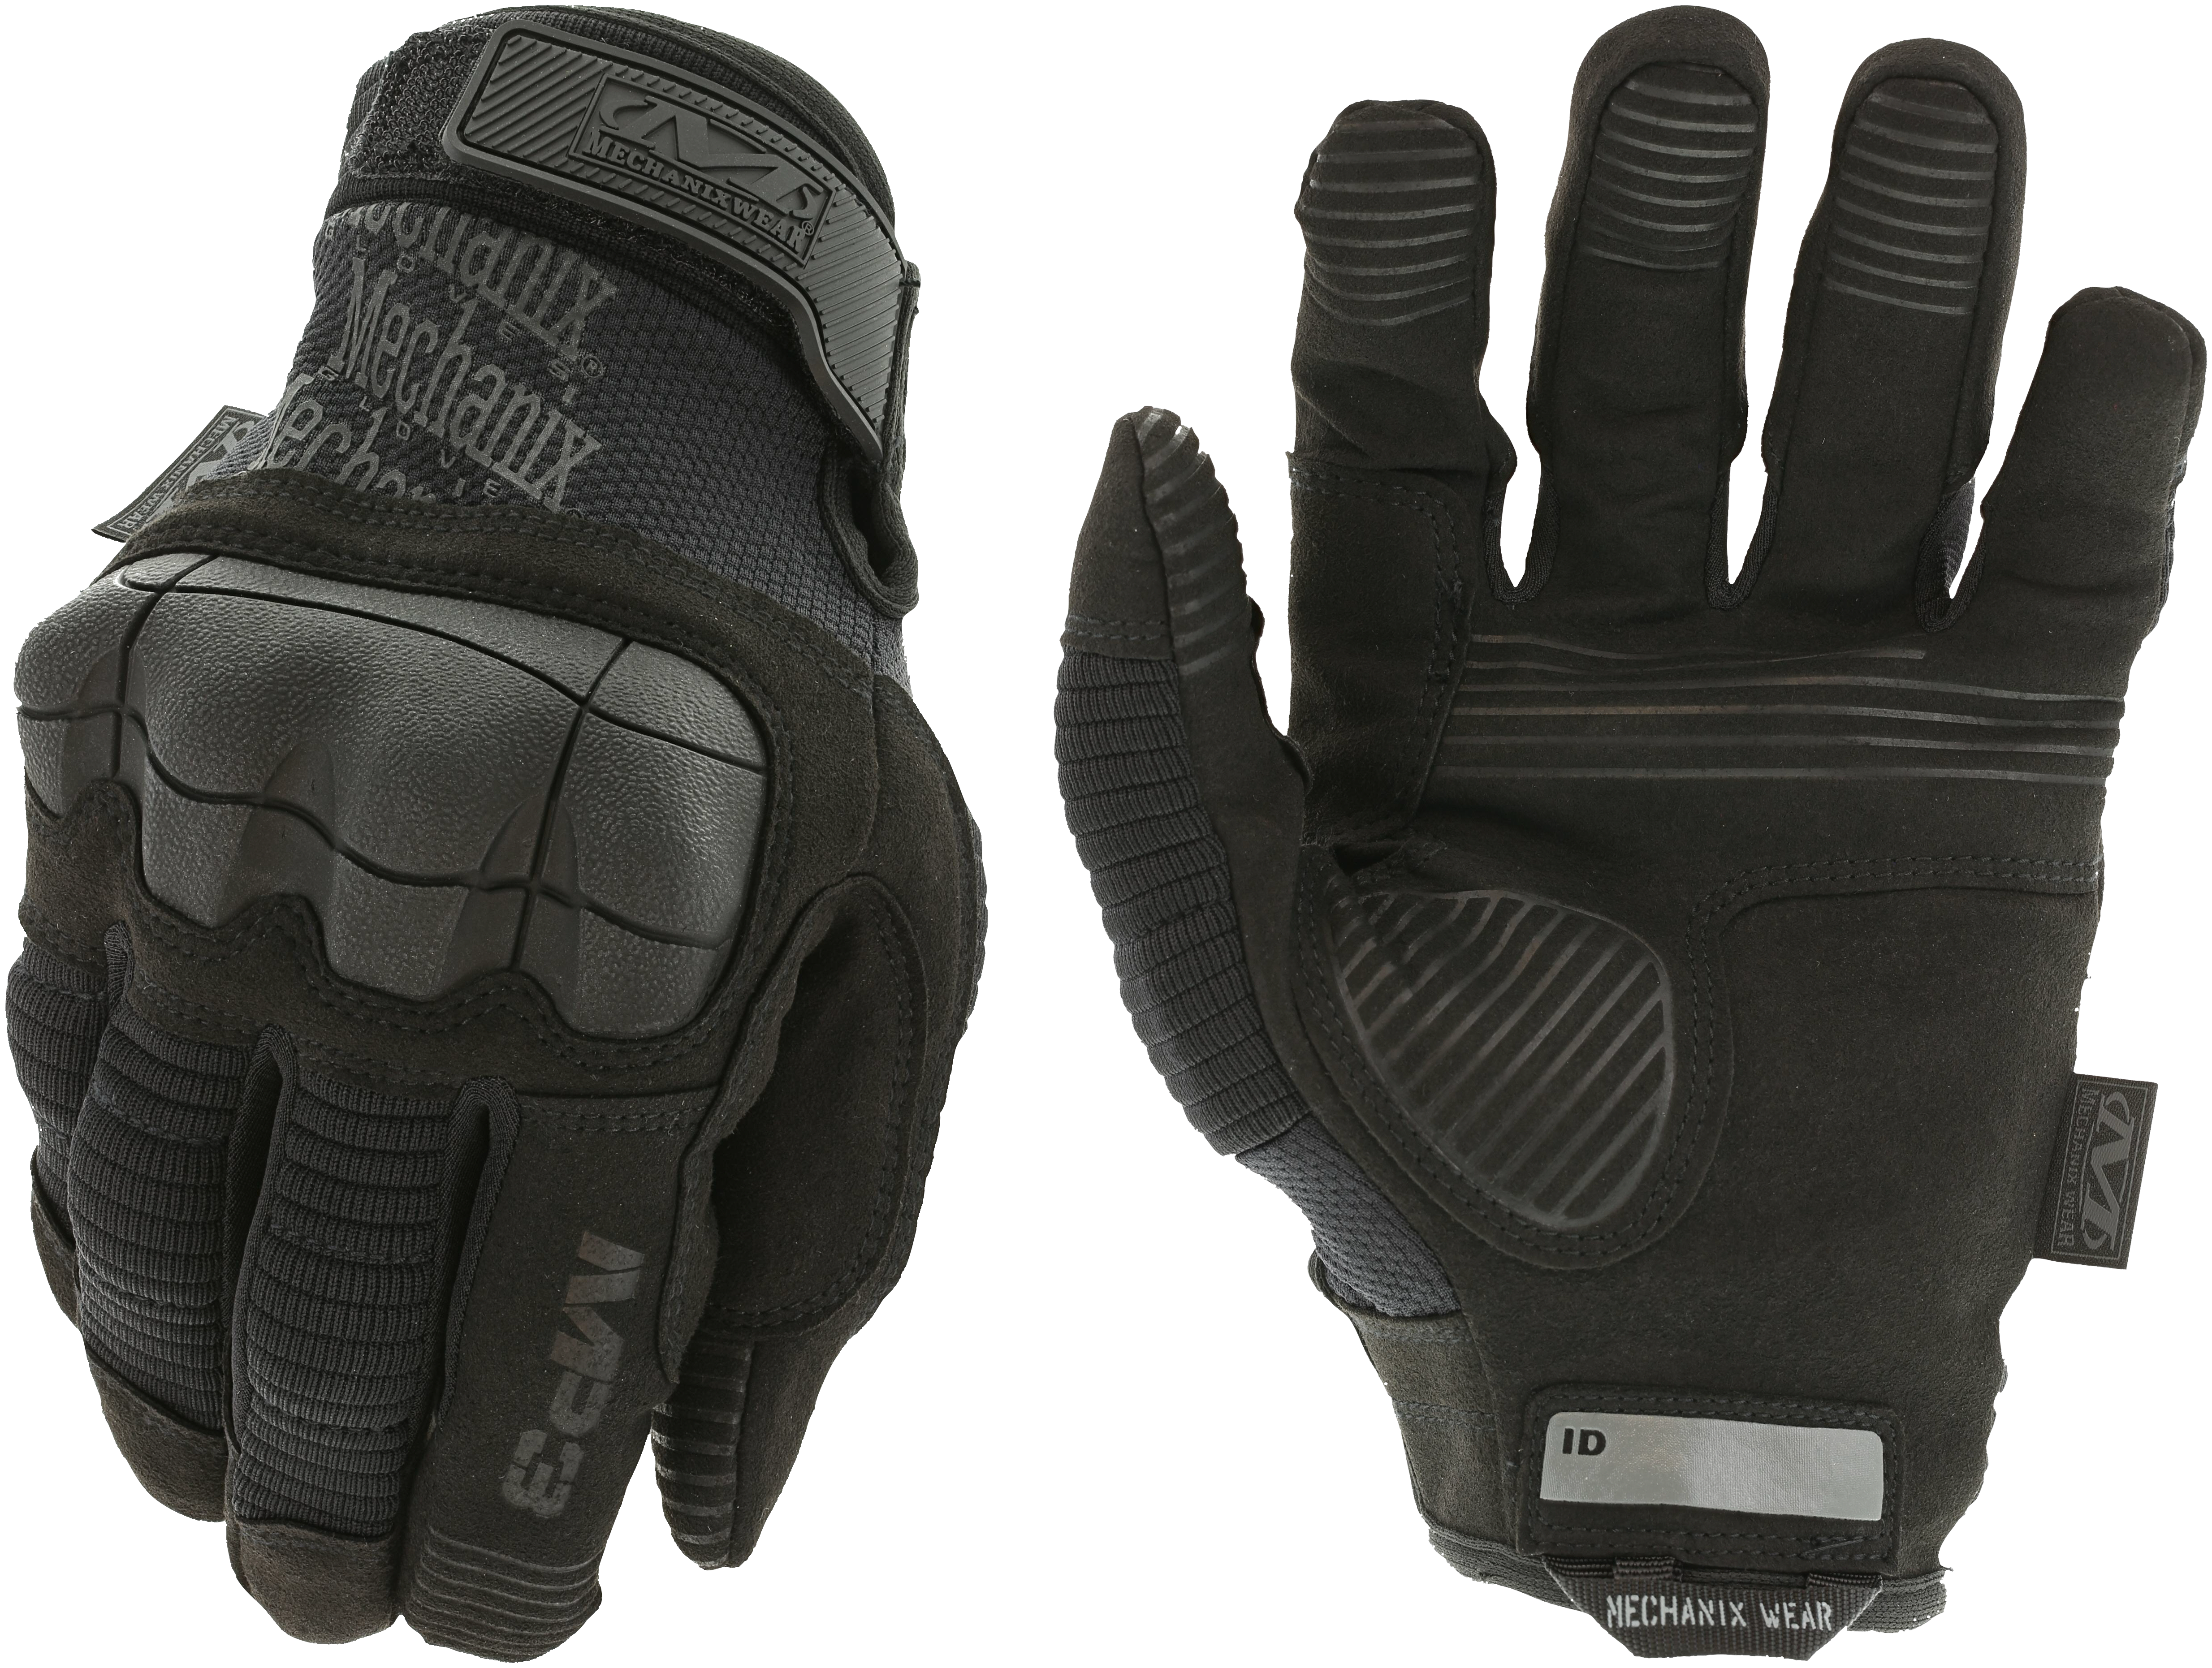 M-Pact 3 Glove SIZE LARGE - Picture 1 of 1